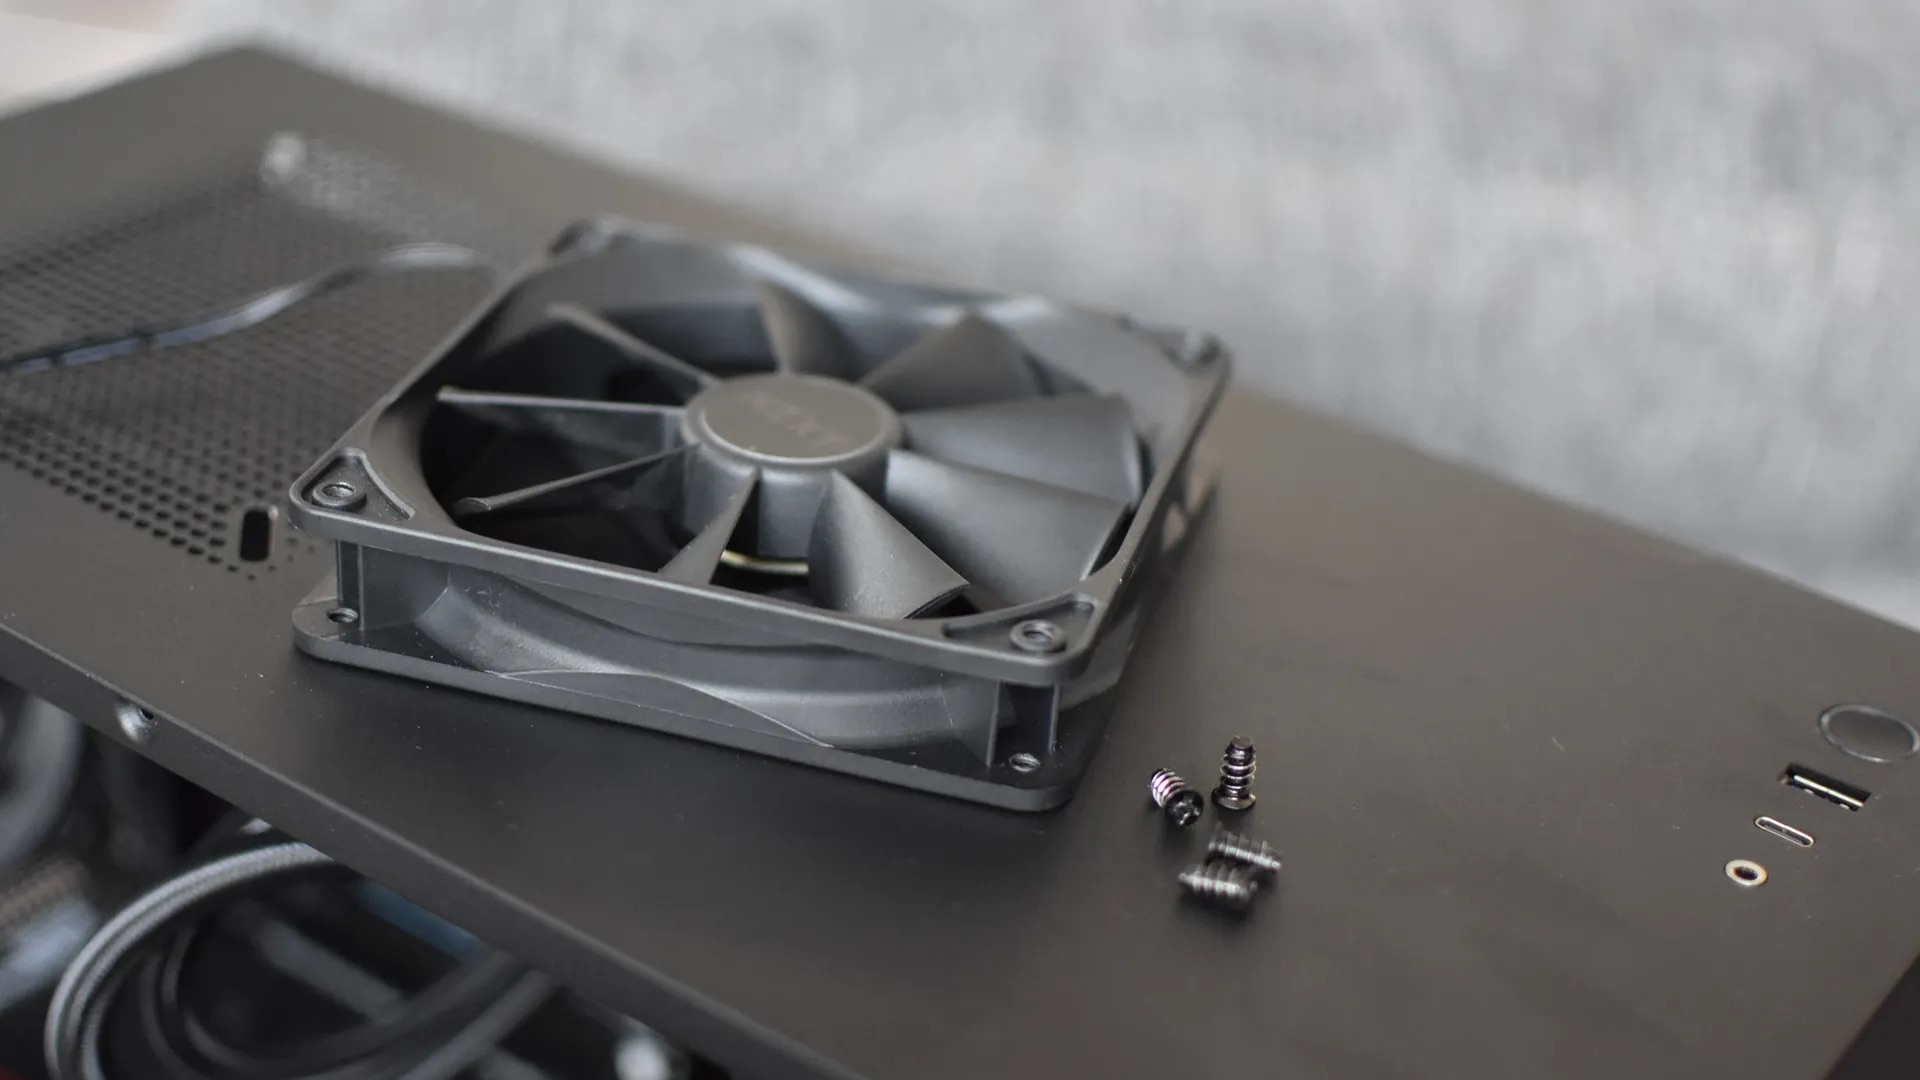 How To Install Computer Case Fan Screw That Won’t Fit